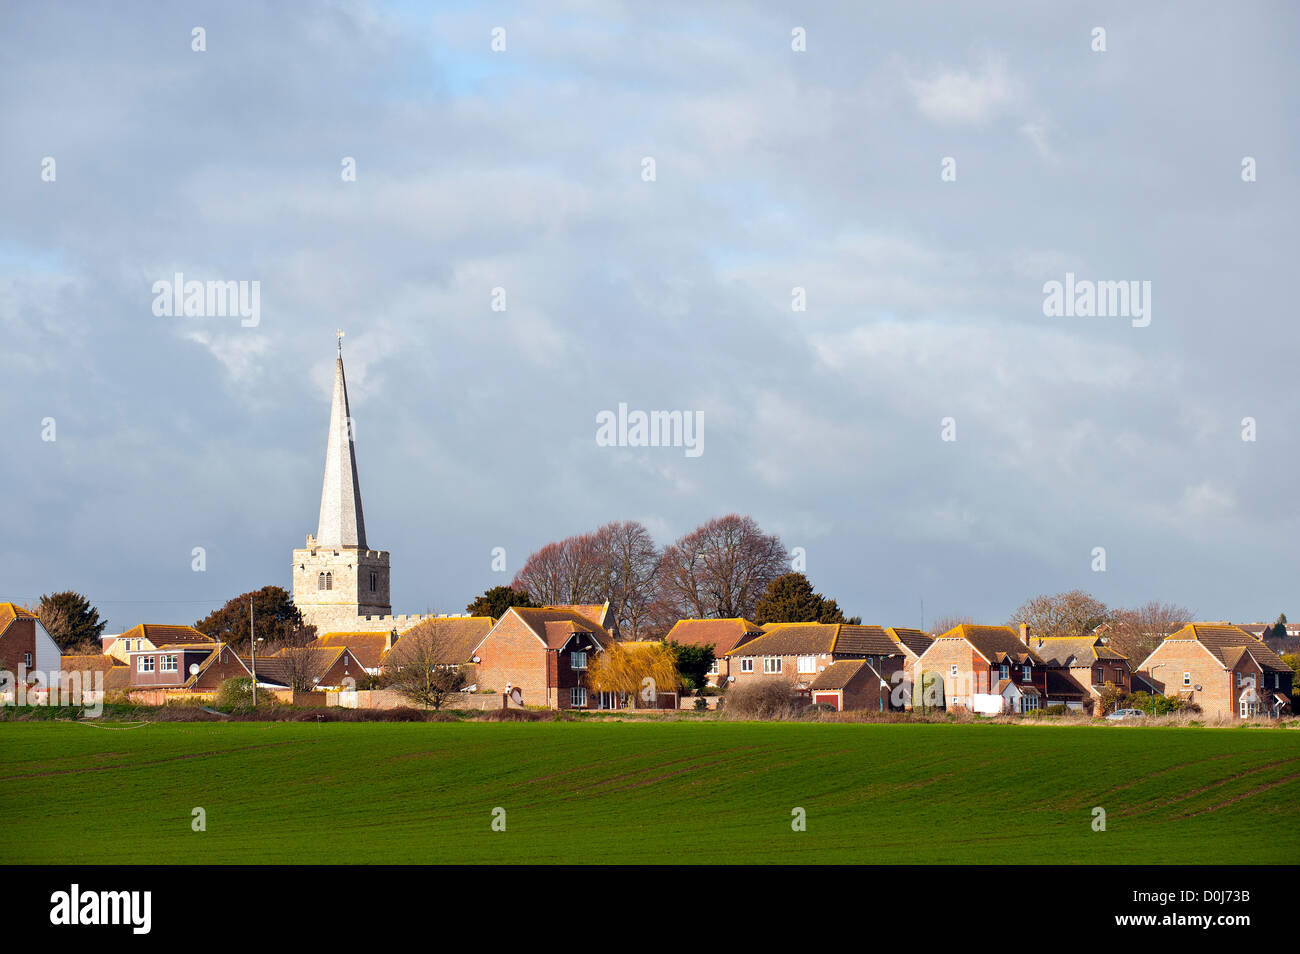 The steeple of a church in the village of Hoo St Werburgh in Kent. Stock Photo